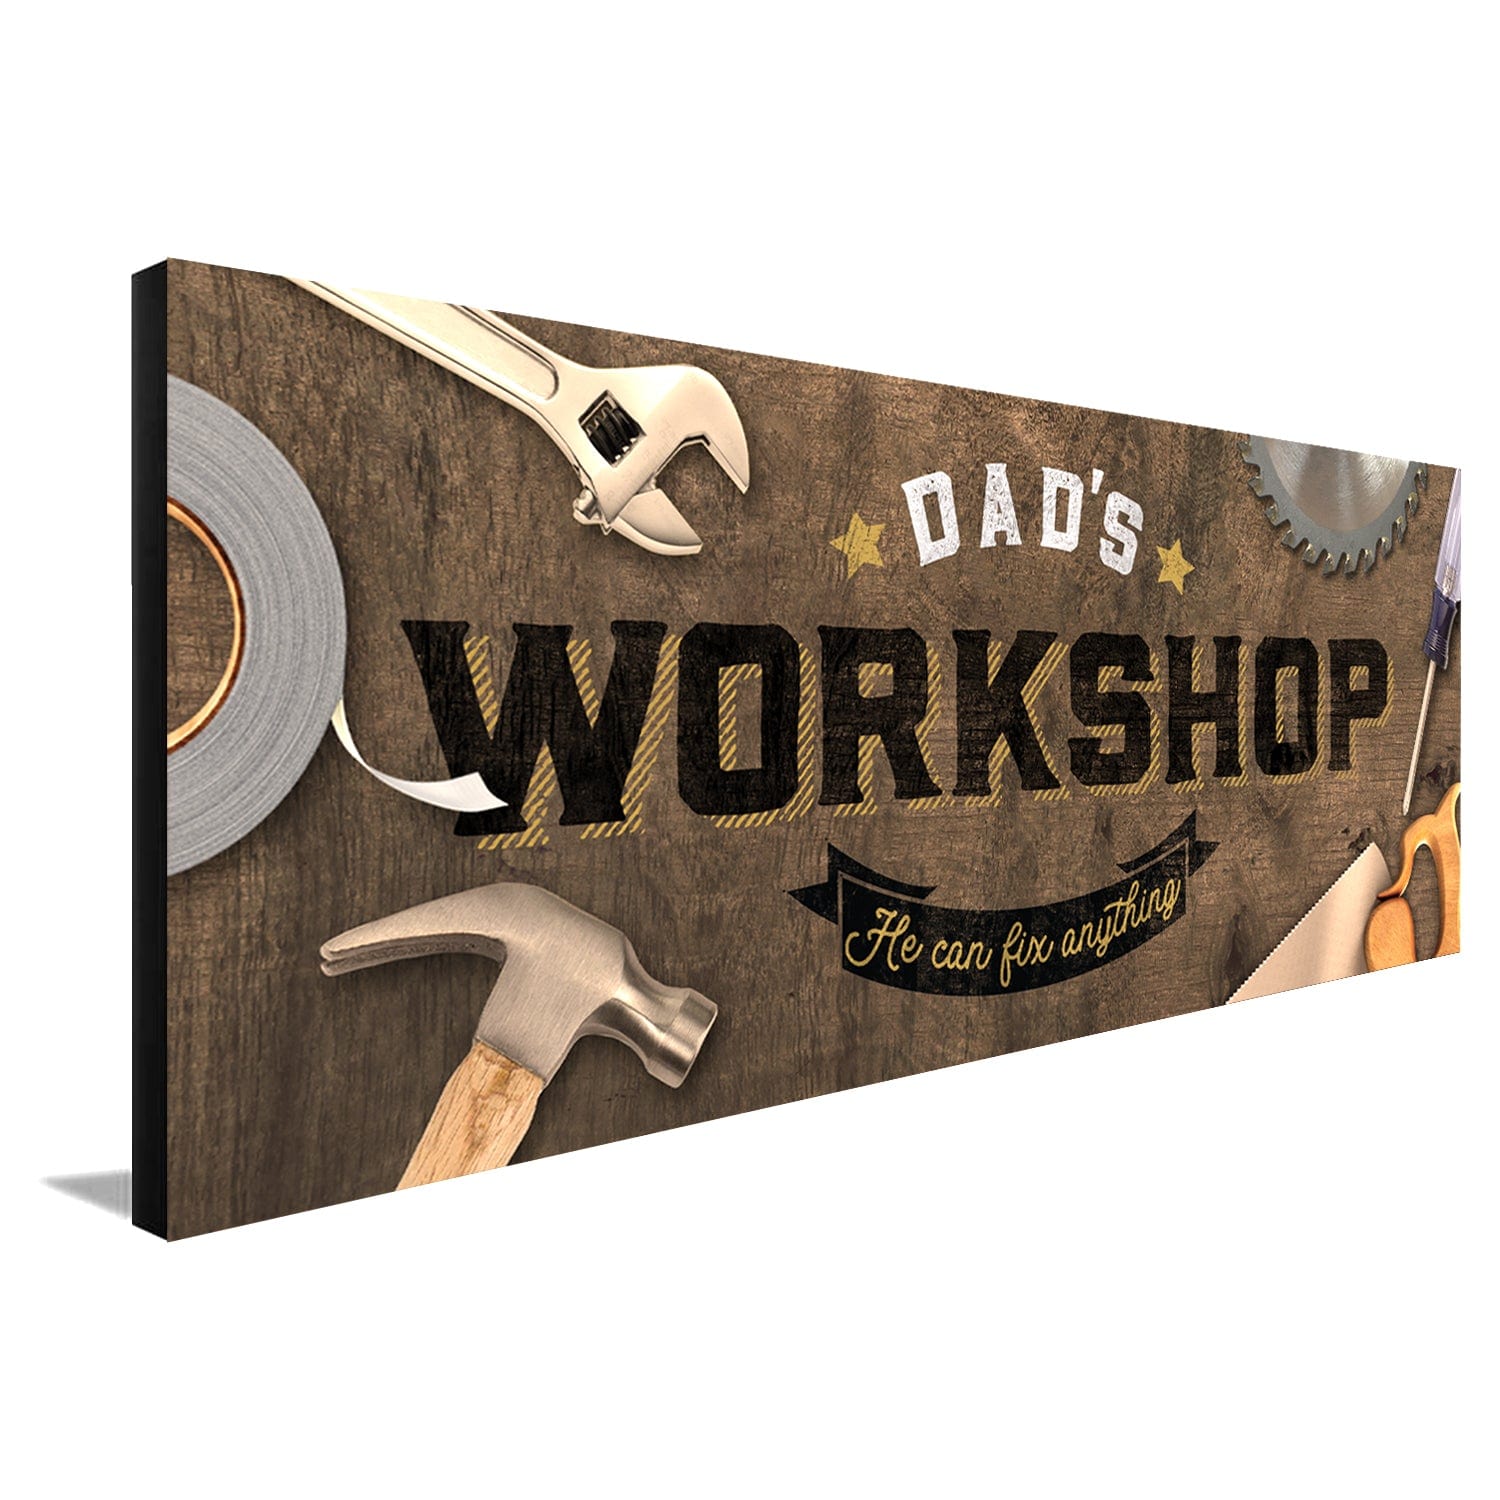 Personalized Workshop Sign from Personal Prints